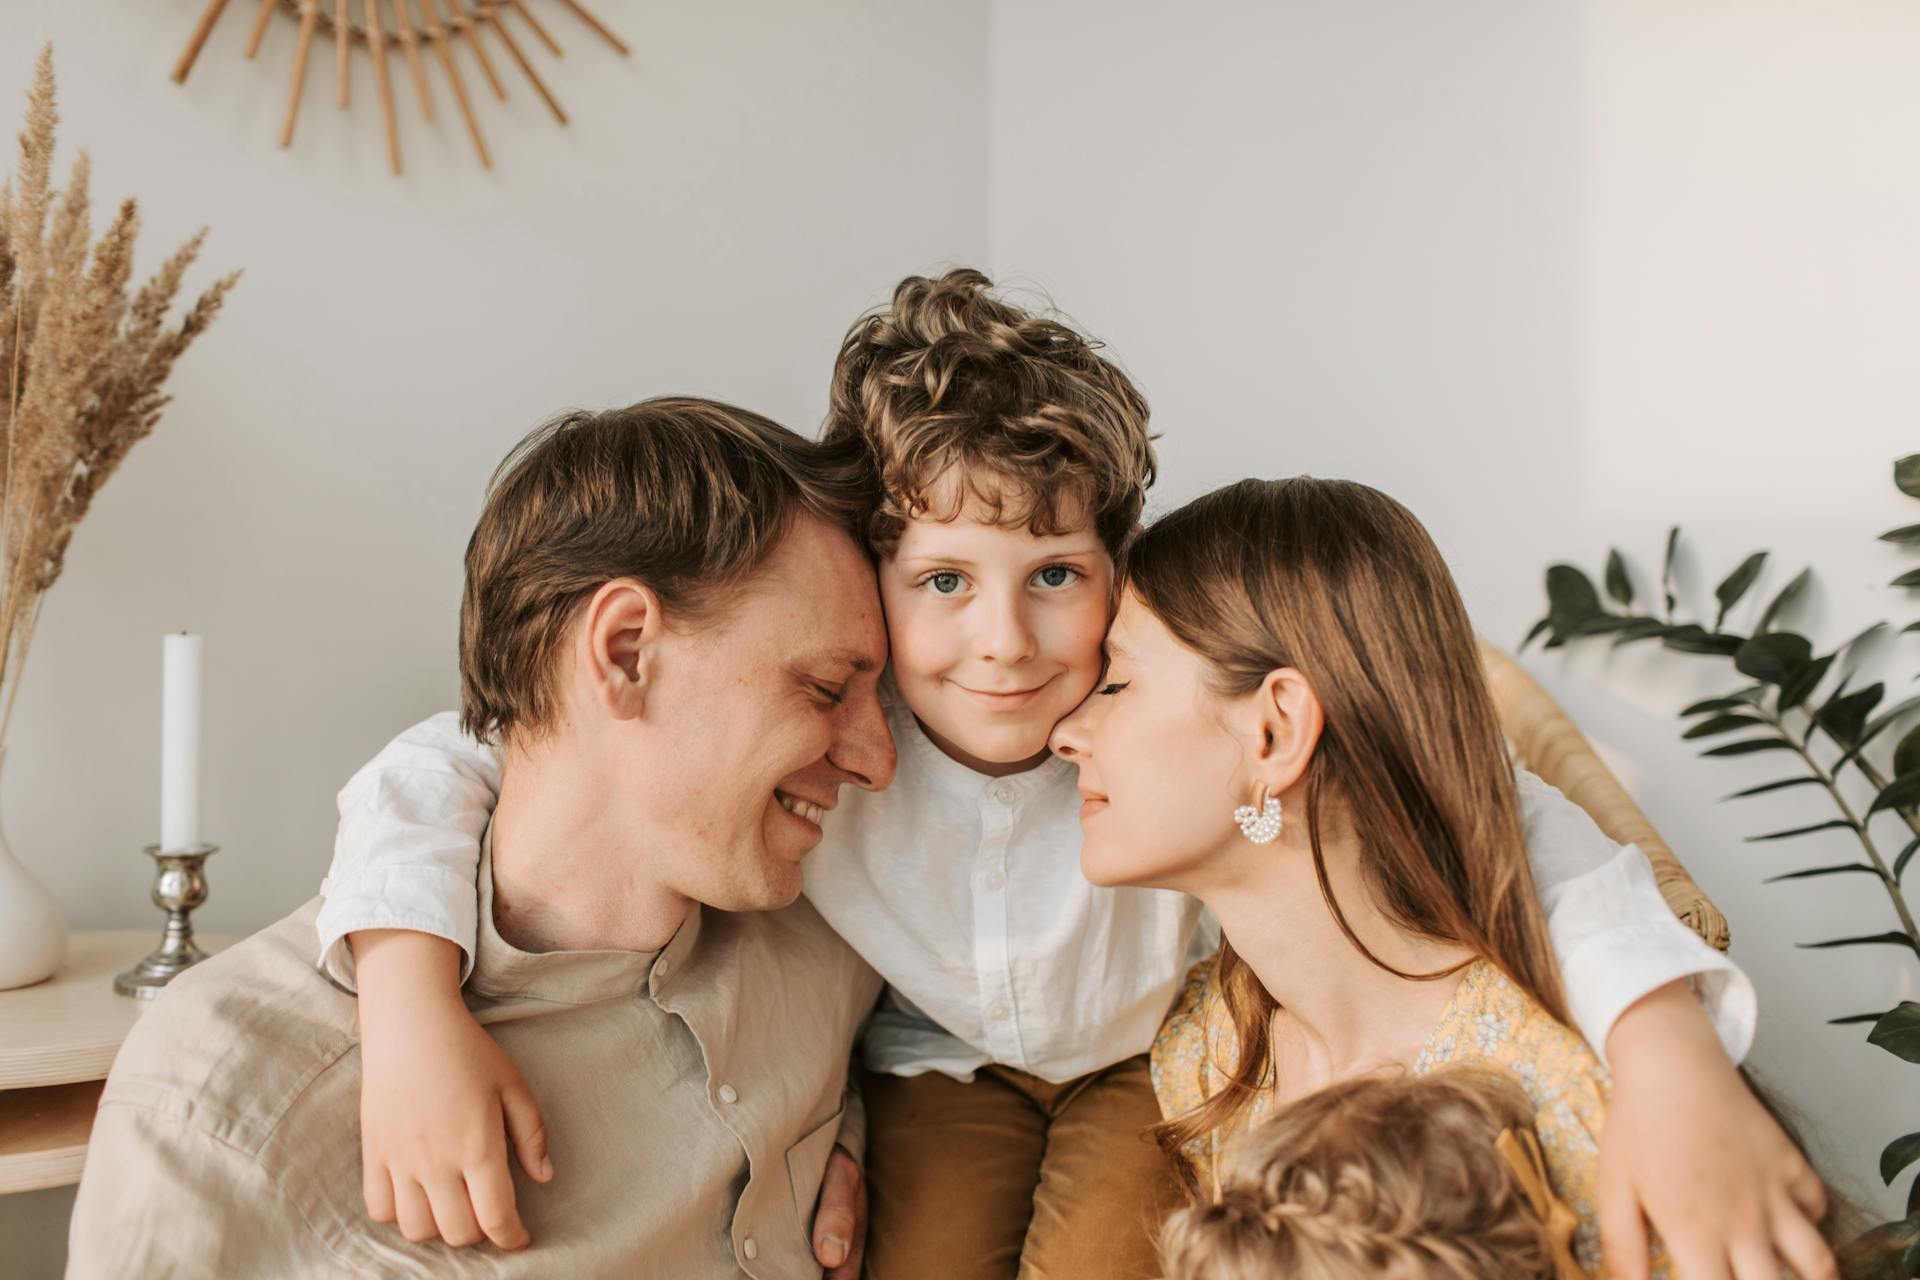 A couple with their son in the middle | Source: Pexels